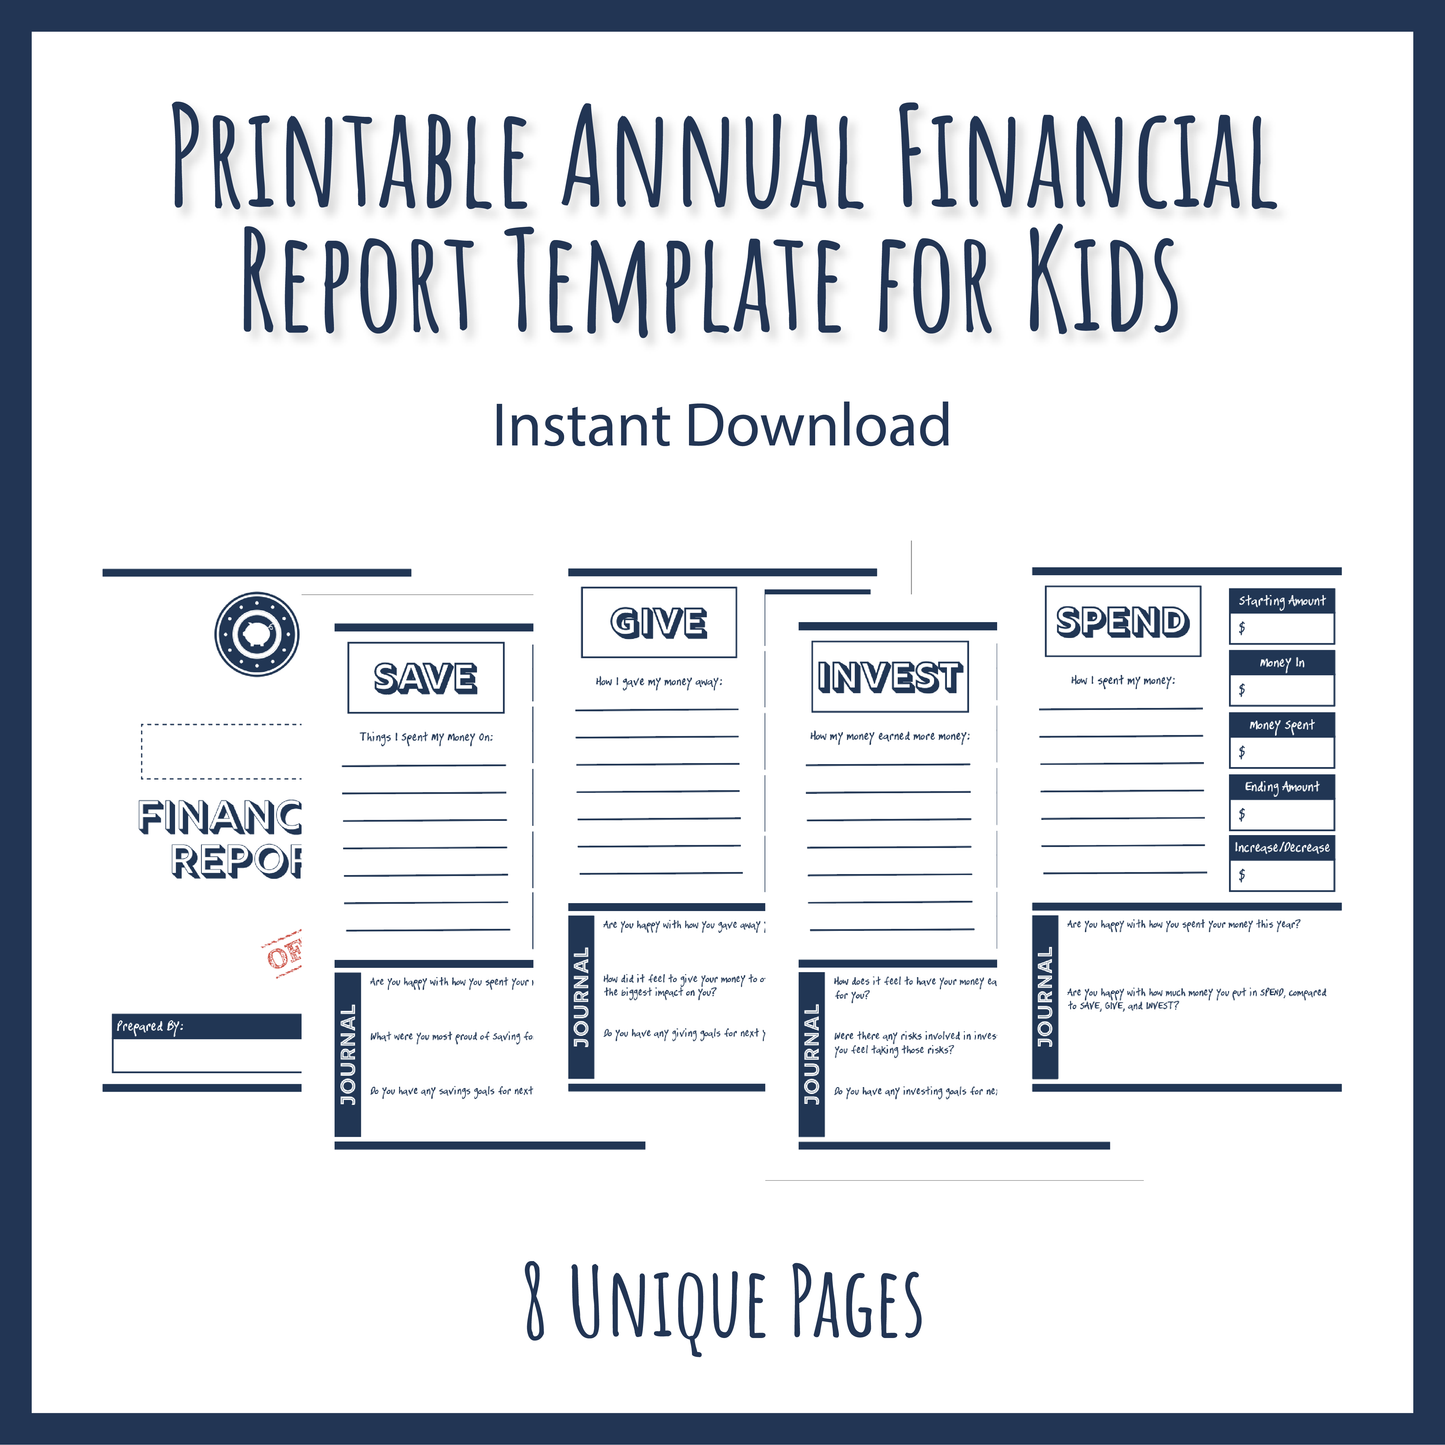 Annual Financial Report Template for Kids Printable